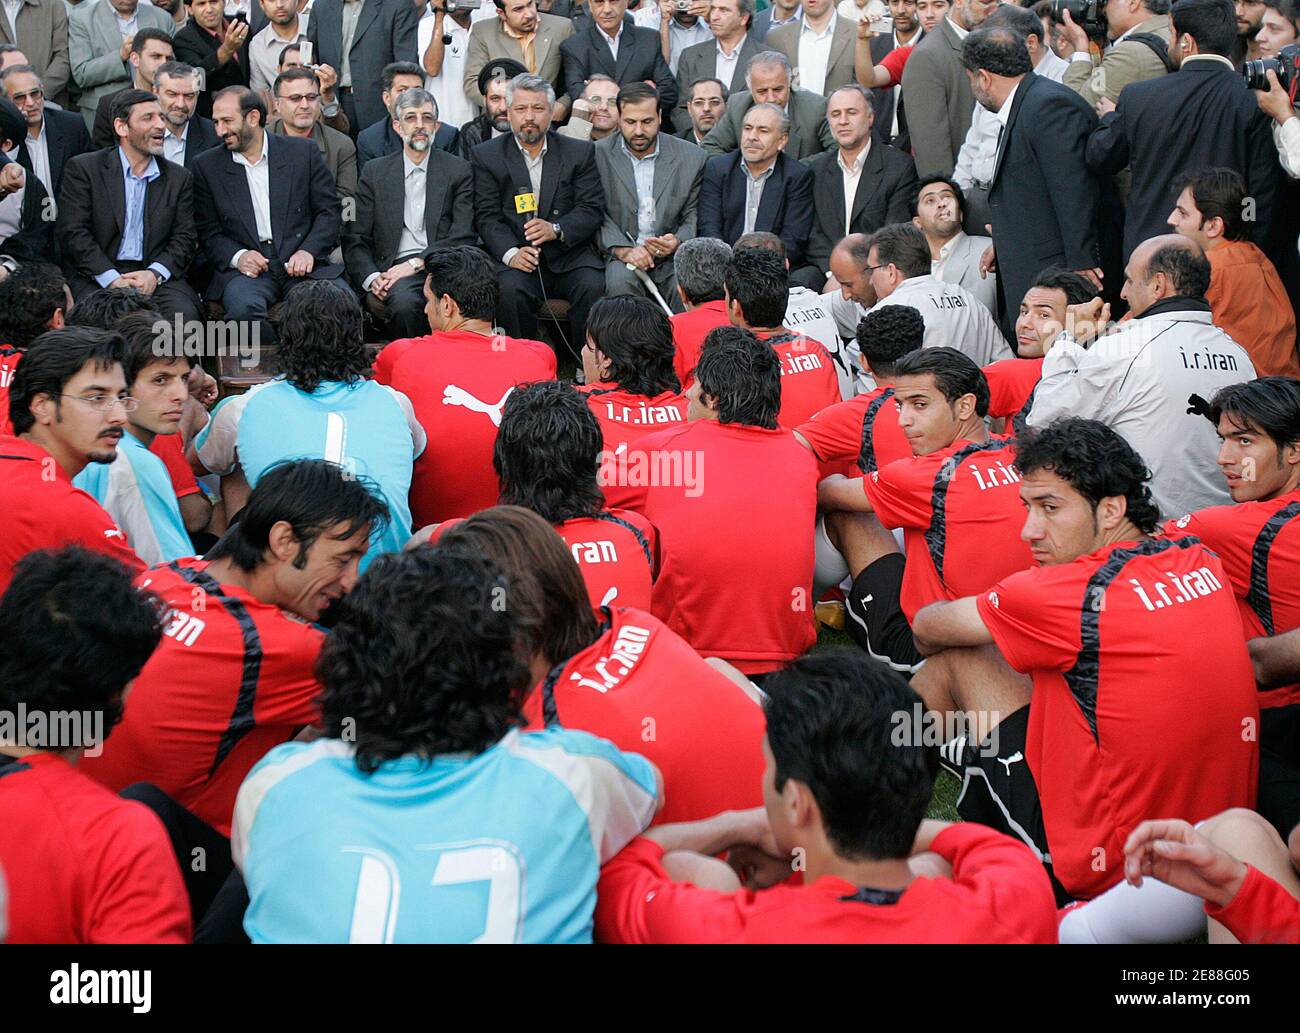 Iran's parliament speaker Gholamali Haddadadel (3rd L) accompanied by unidentified officials from the physical education department meets the members of Iran's World Cup team during a practice session at Azadi sport complex in Tehran, Iran May 23, 2006.   REUTERS/Raheb Homavandi Stock Photo